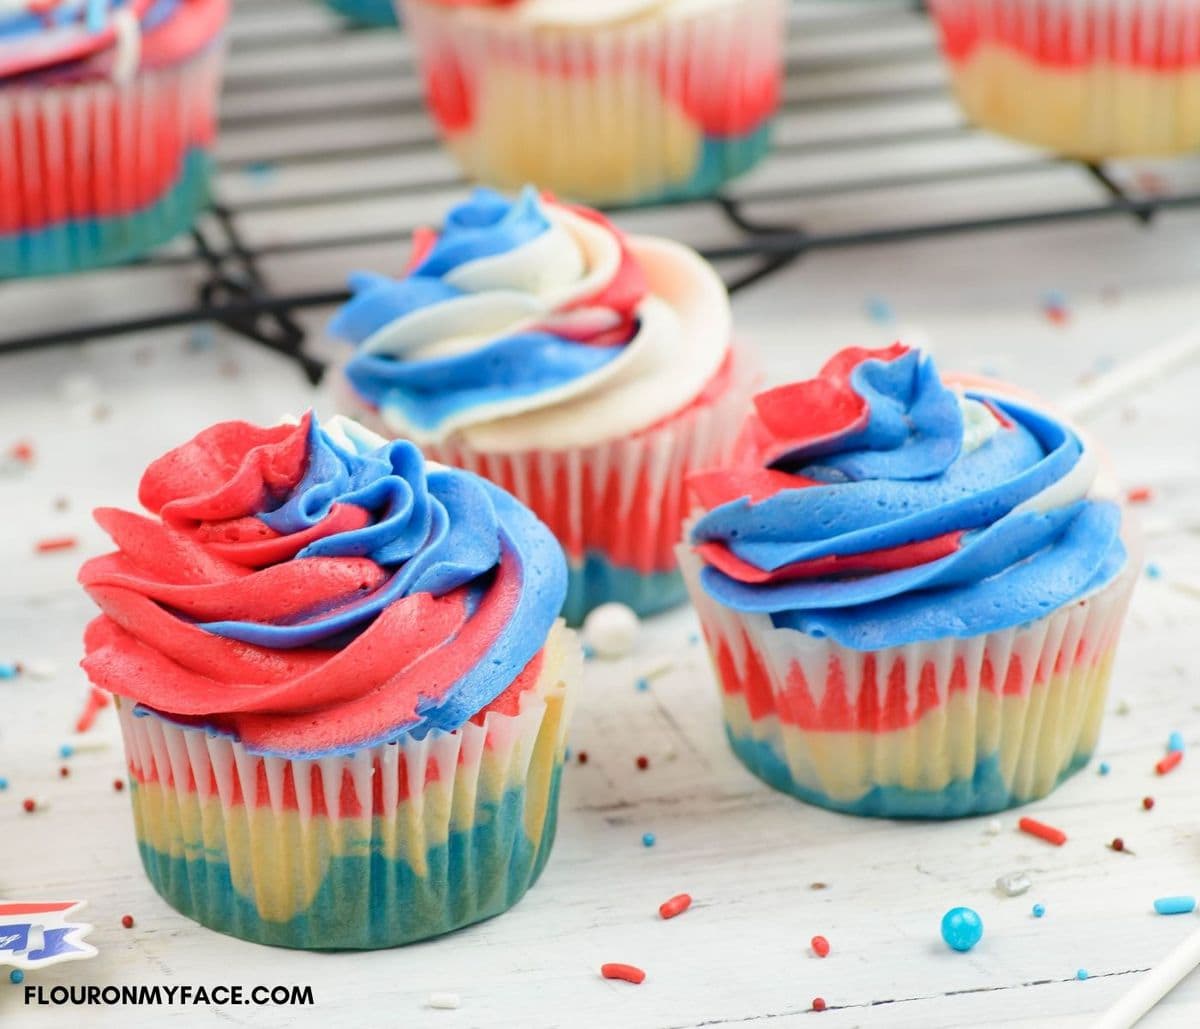 Three 4th of july cupcakes decorated with red, white and blue frosting.